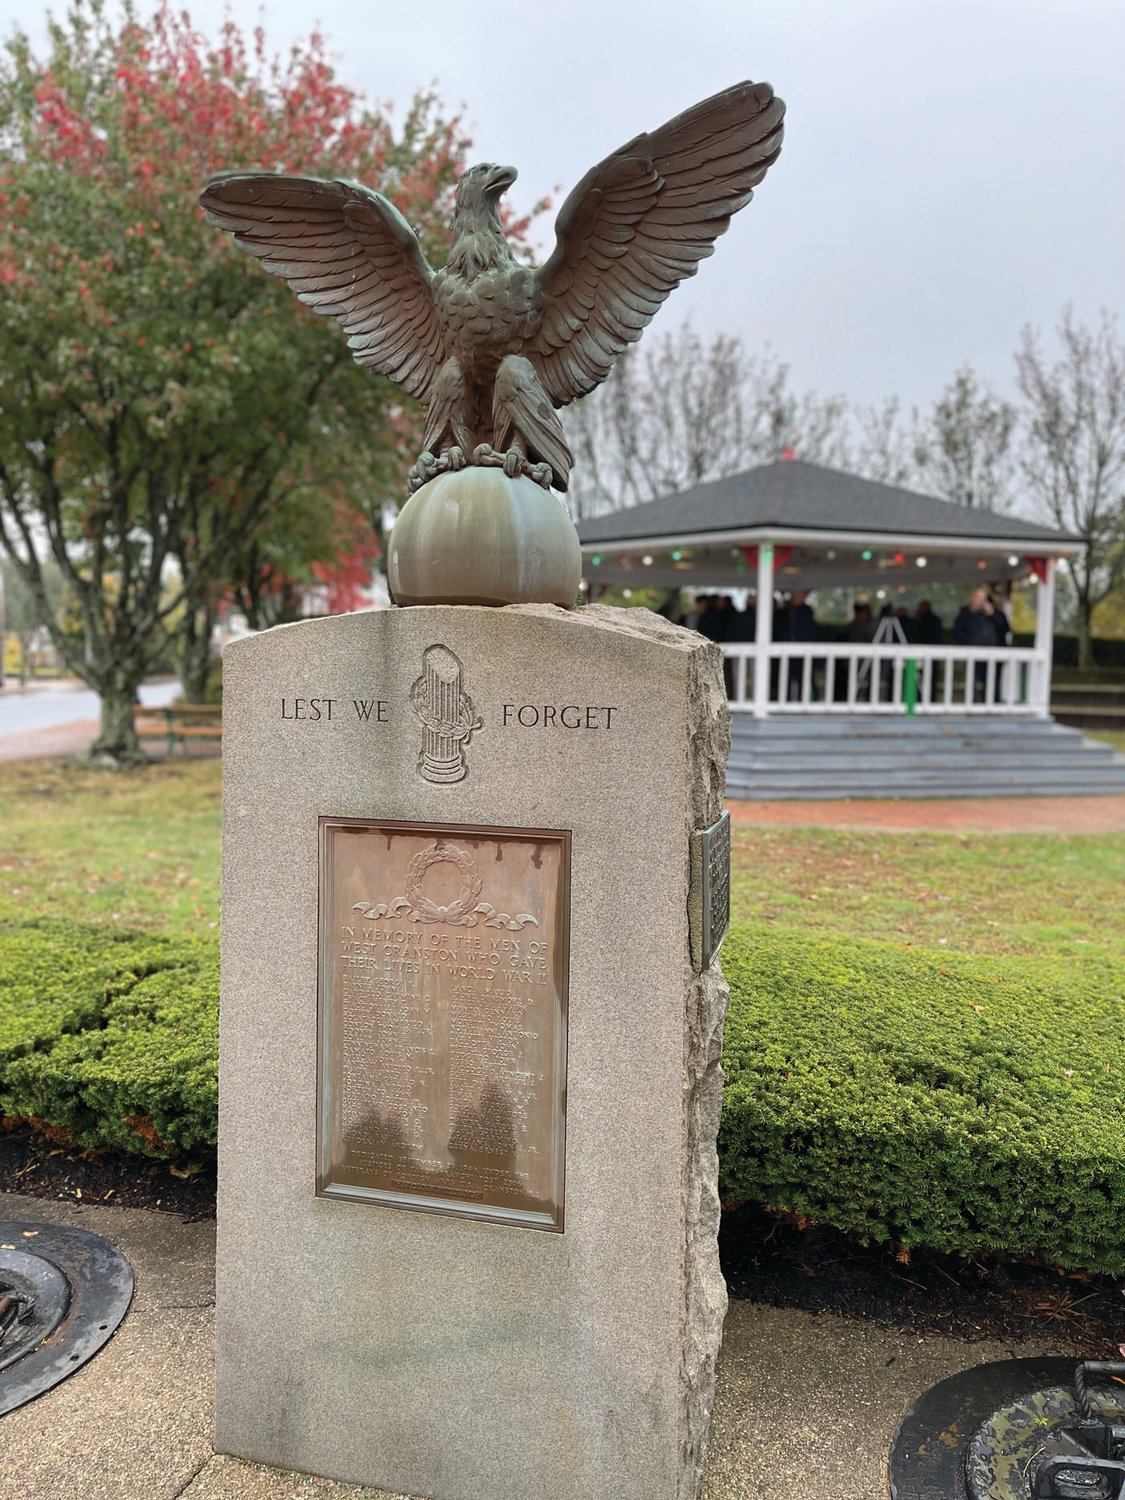 HONORING HERITAGE: A monument to the Western Cranston residents lost in World War II sits outside the Knightsville Gazebo, which will be replaced as part of the city’s revitalization effort.